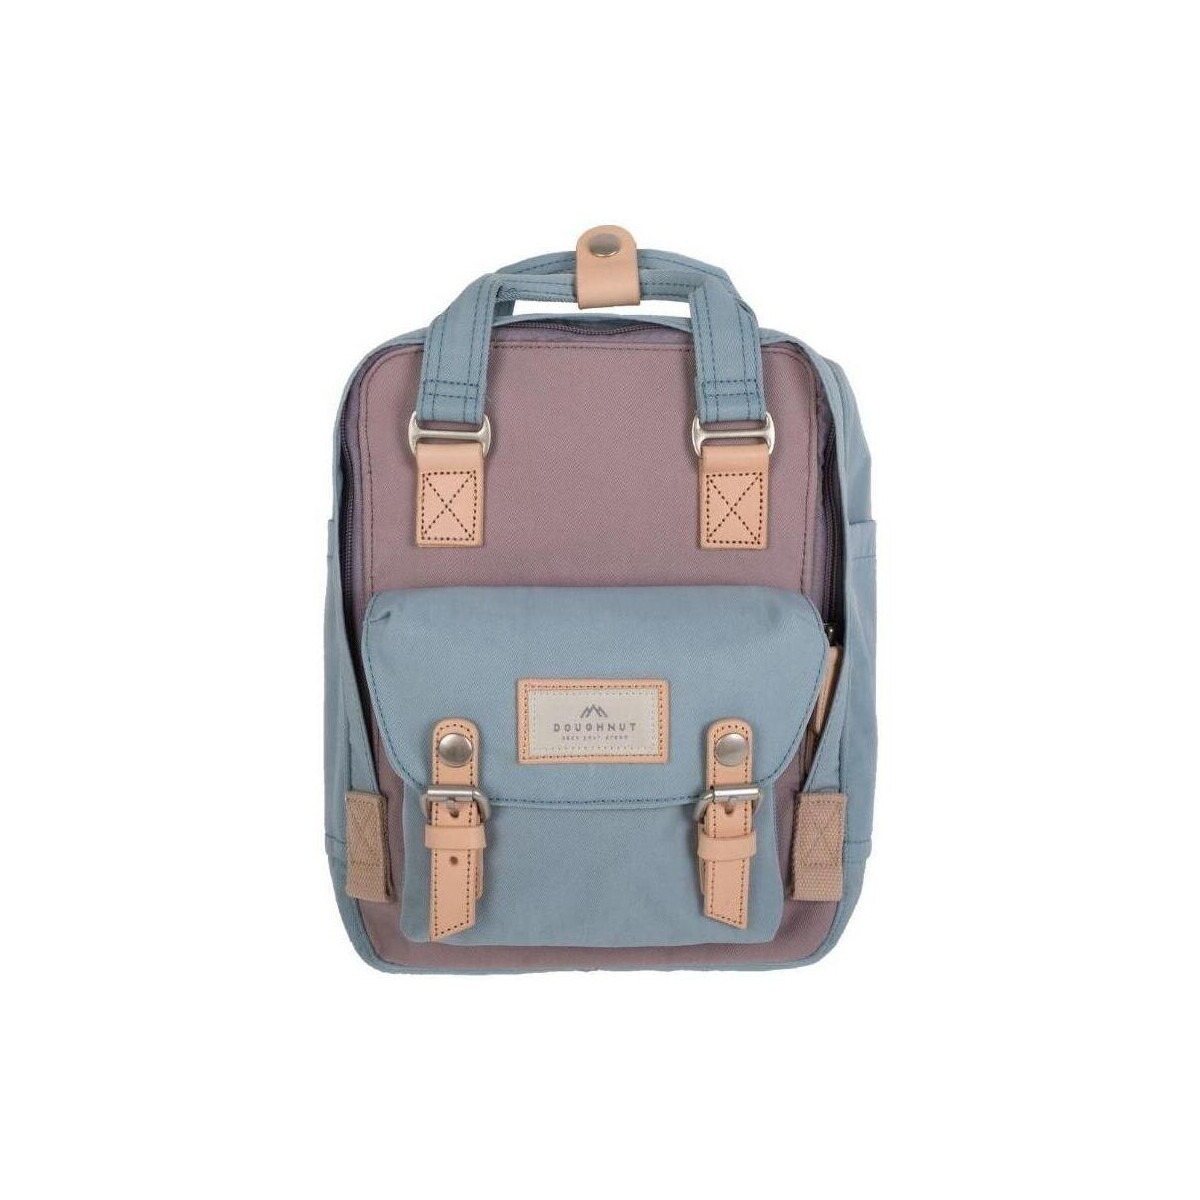 Spartoo Lady Multicolor Backpack by Doughnut GOOFASH